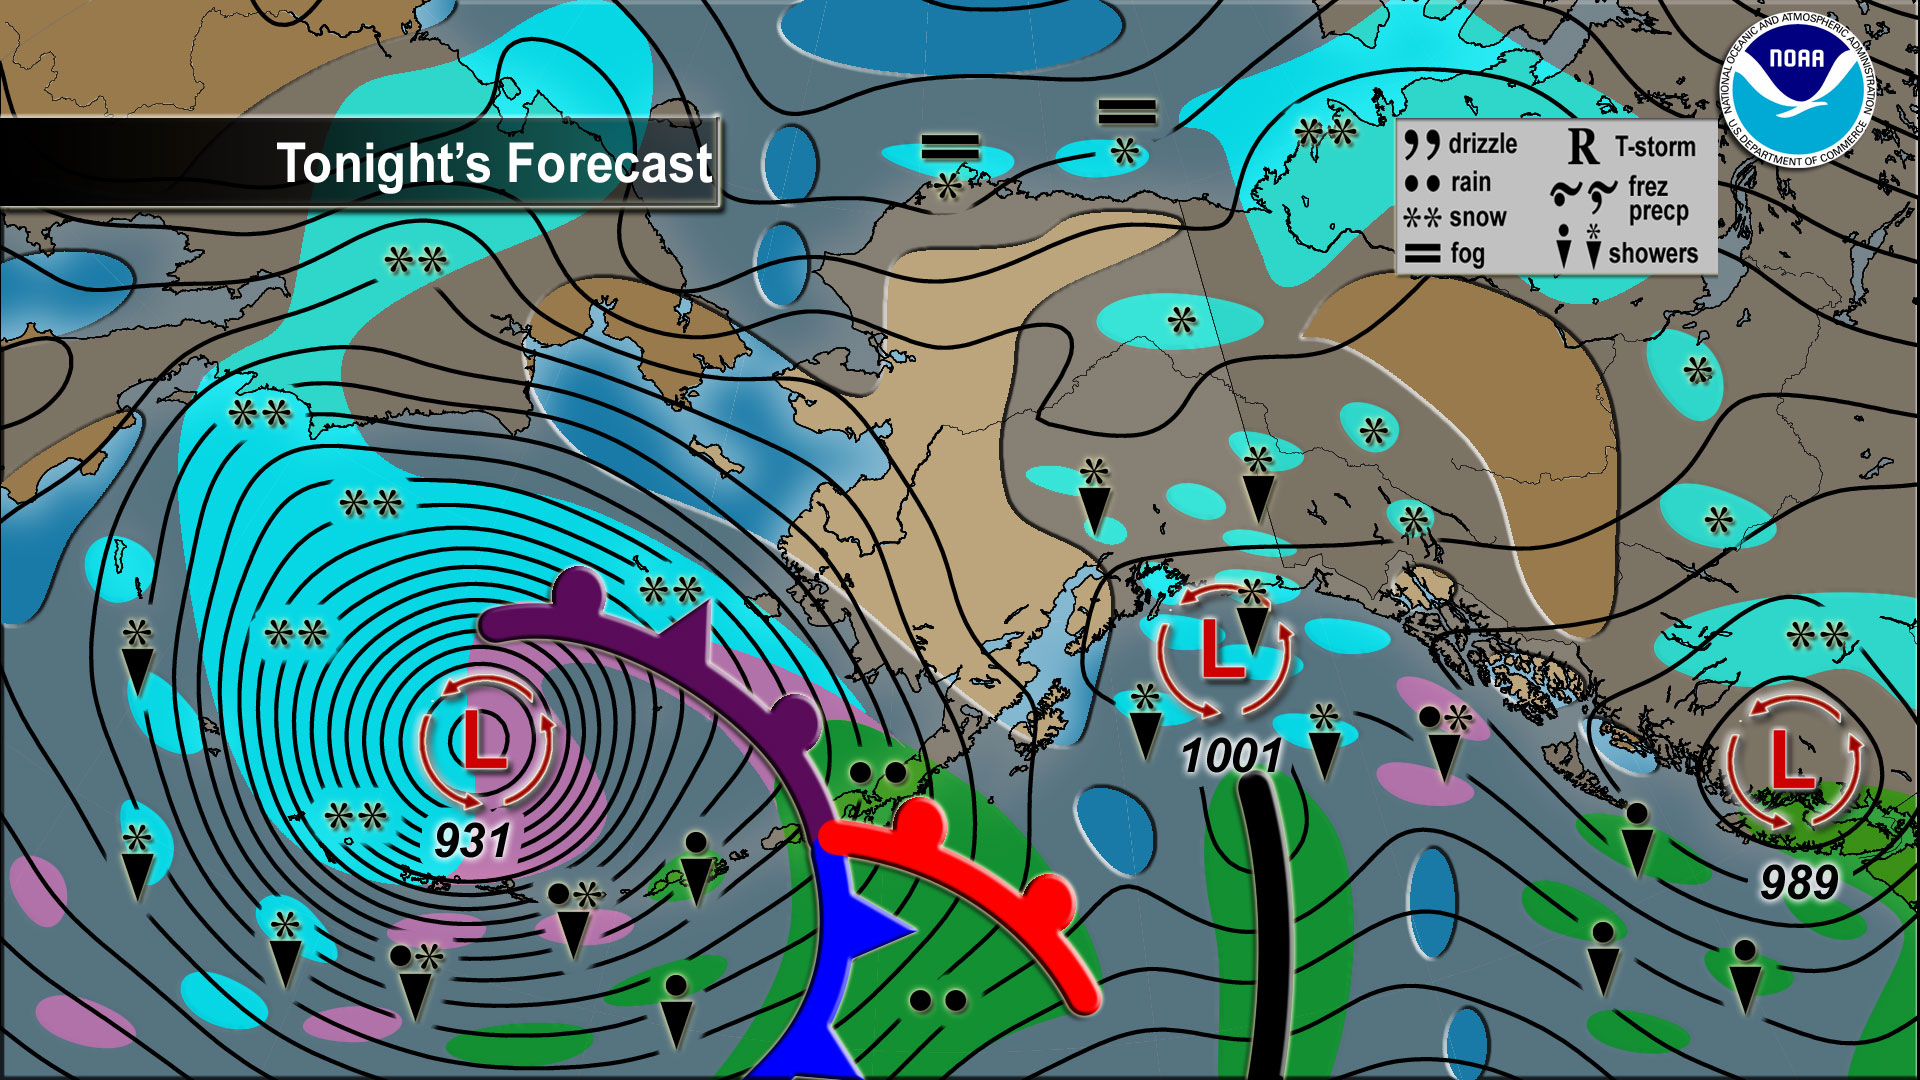 NOAA's "TV Forecast" for AK today. image: noaa, today